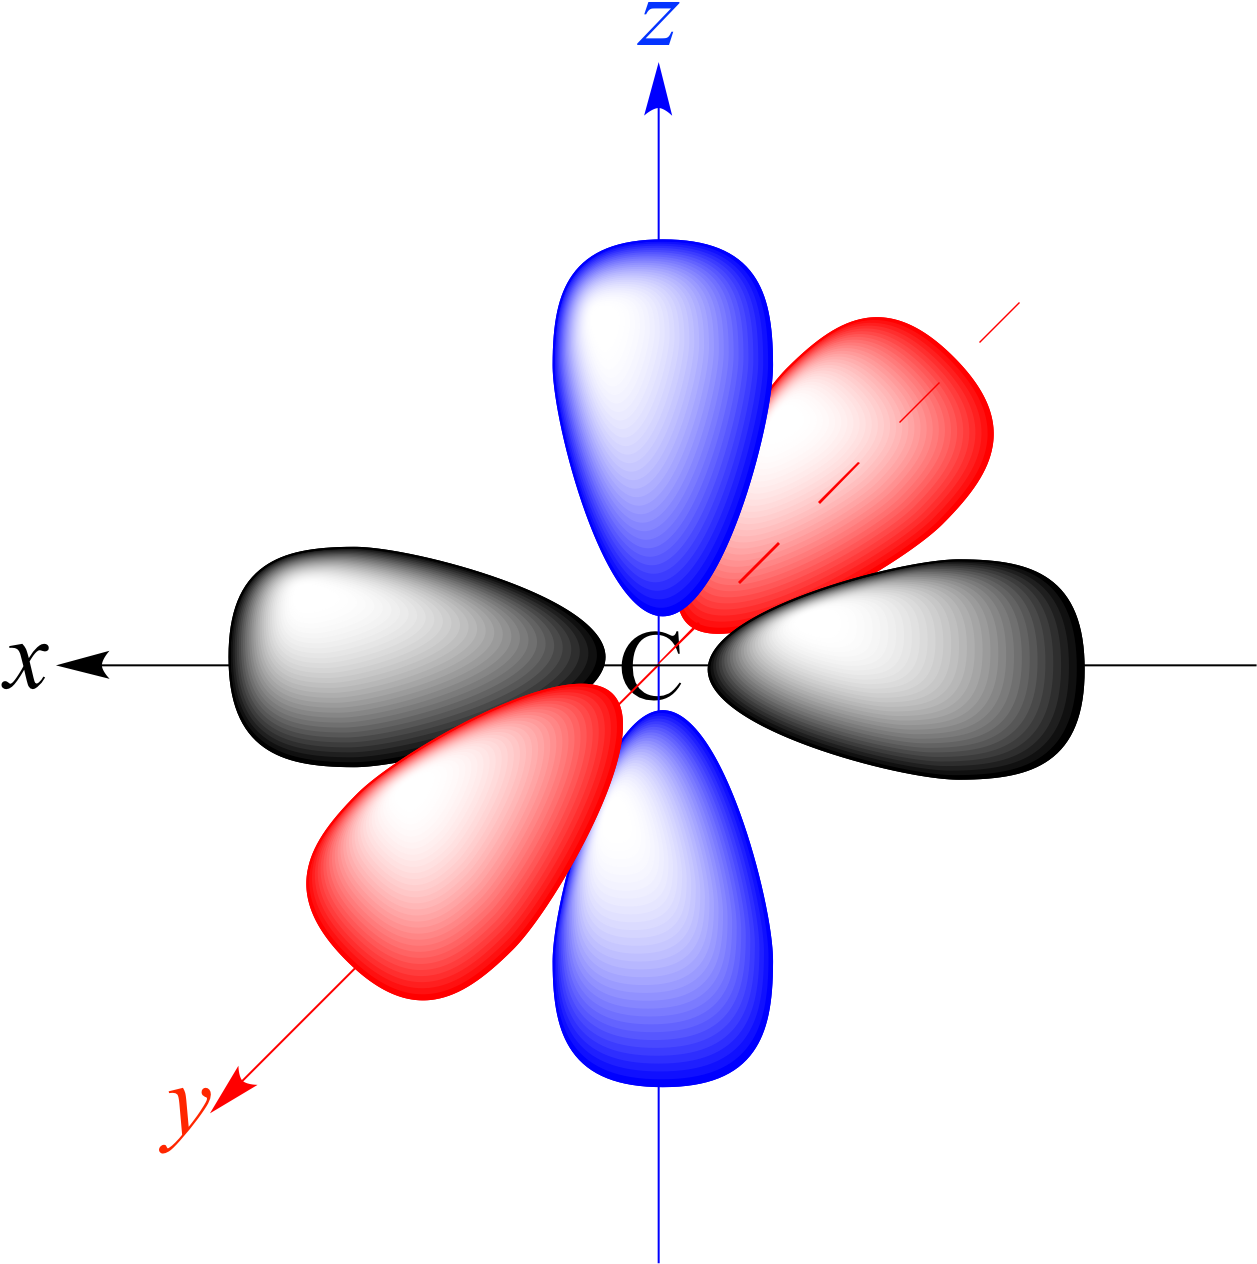 The Px, Py, And Pz Atomic Orbitals Of Carbon - Atomic Orbital For Carbon (1271x1325)